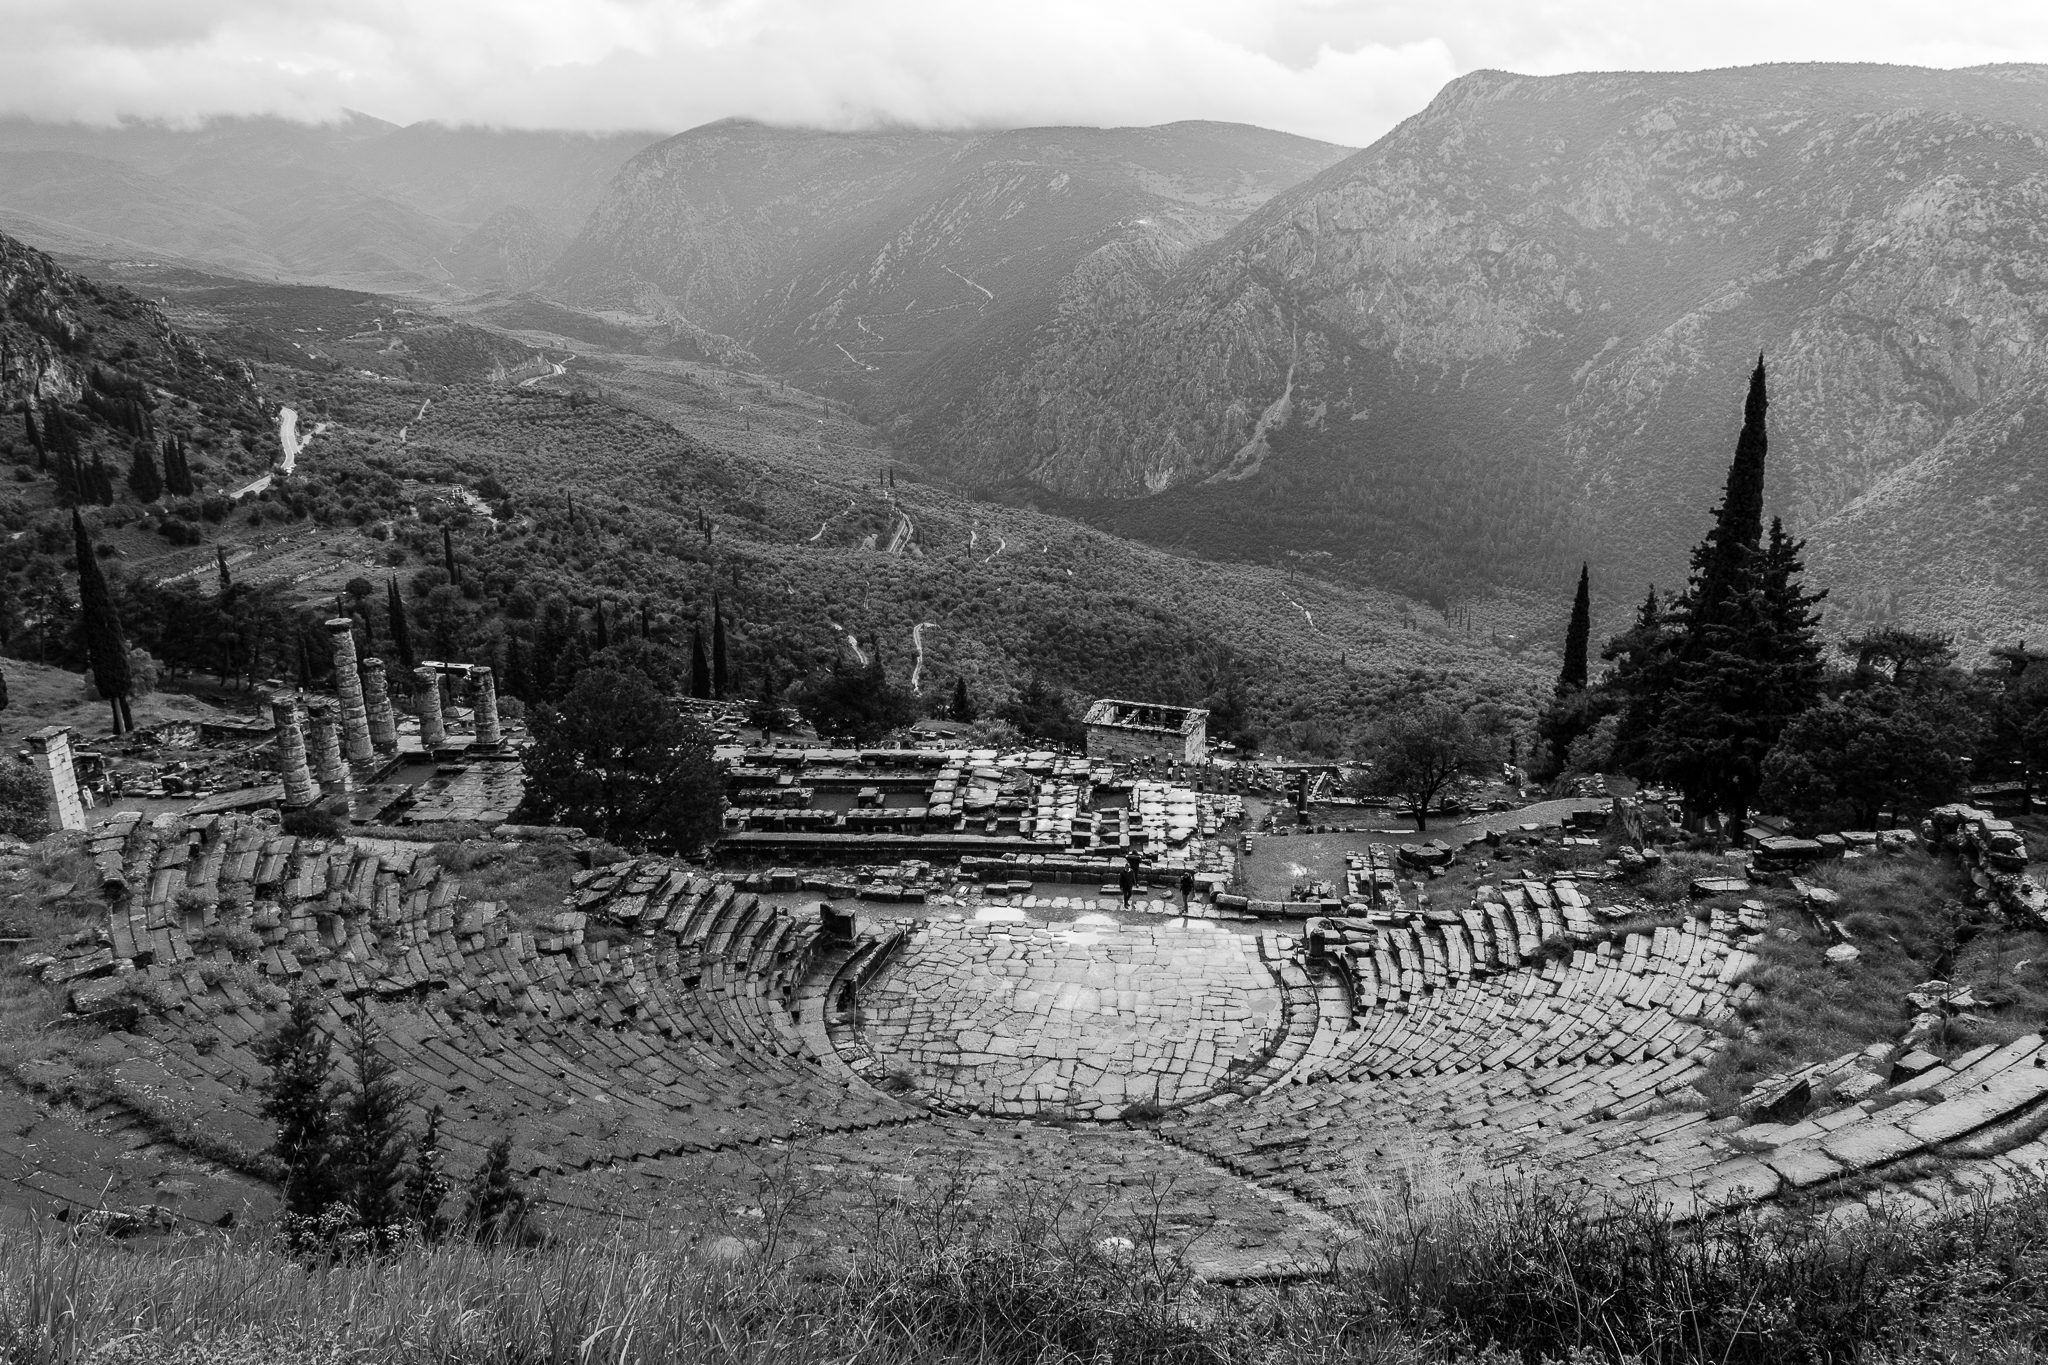  The sanctuary of Delphi lies at the foot of mount Parnassus and is one of the most known oracles of Ancient Greece. It is said that the god Apollo talked through the pious, priestesses of the temple. During the seventh century B.C. it became one of the most important places in the Hellenic world.